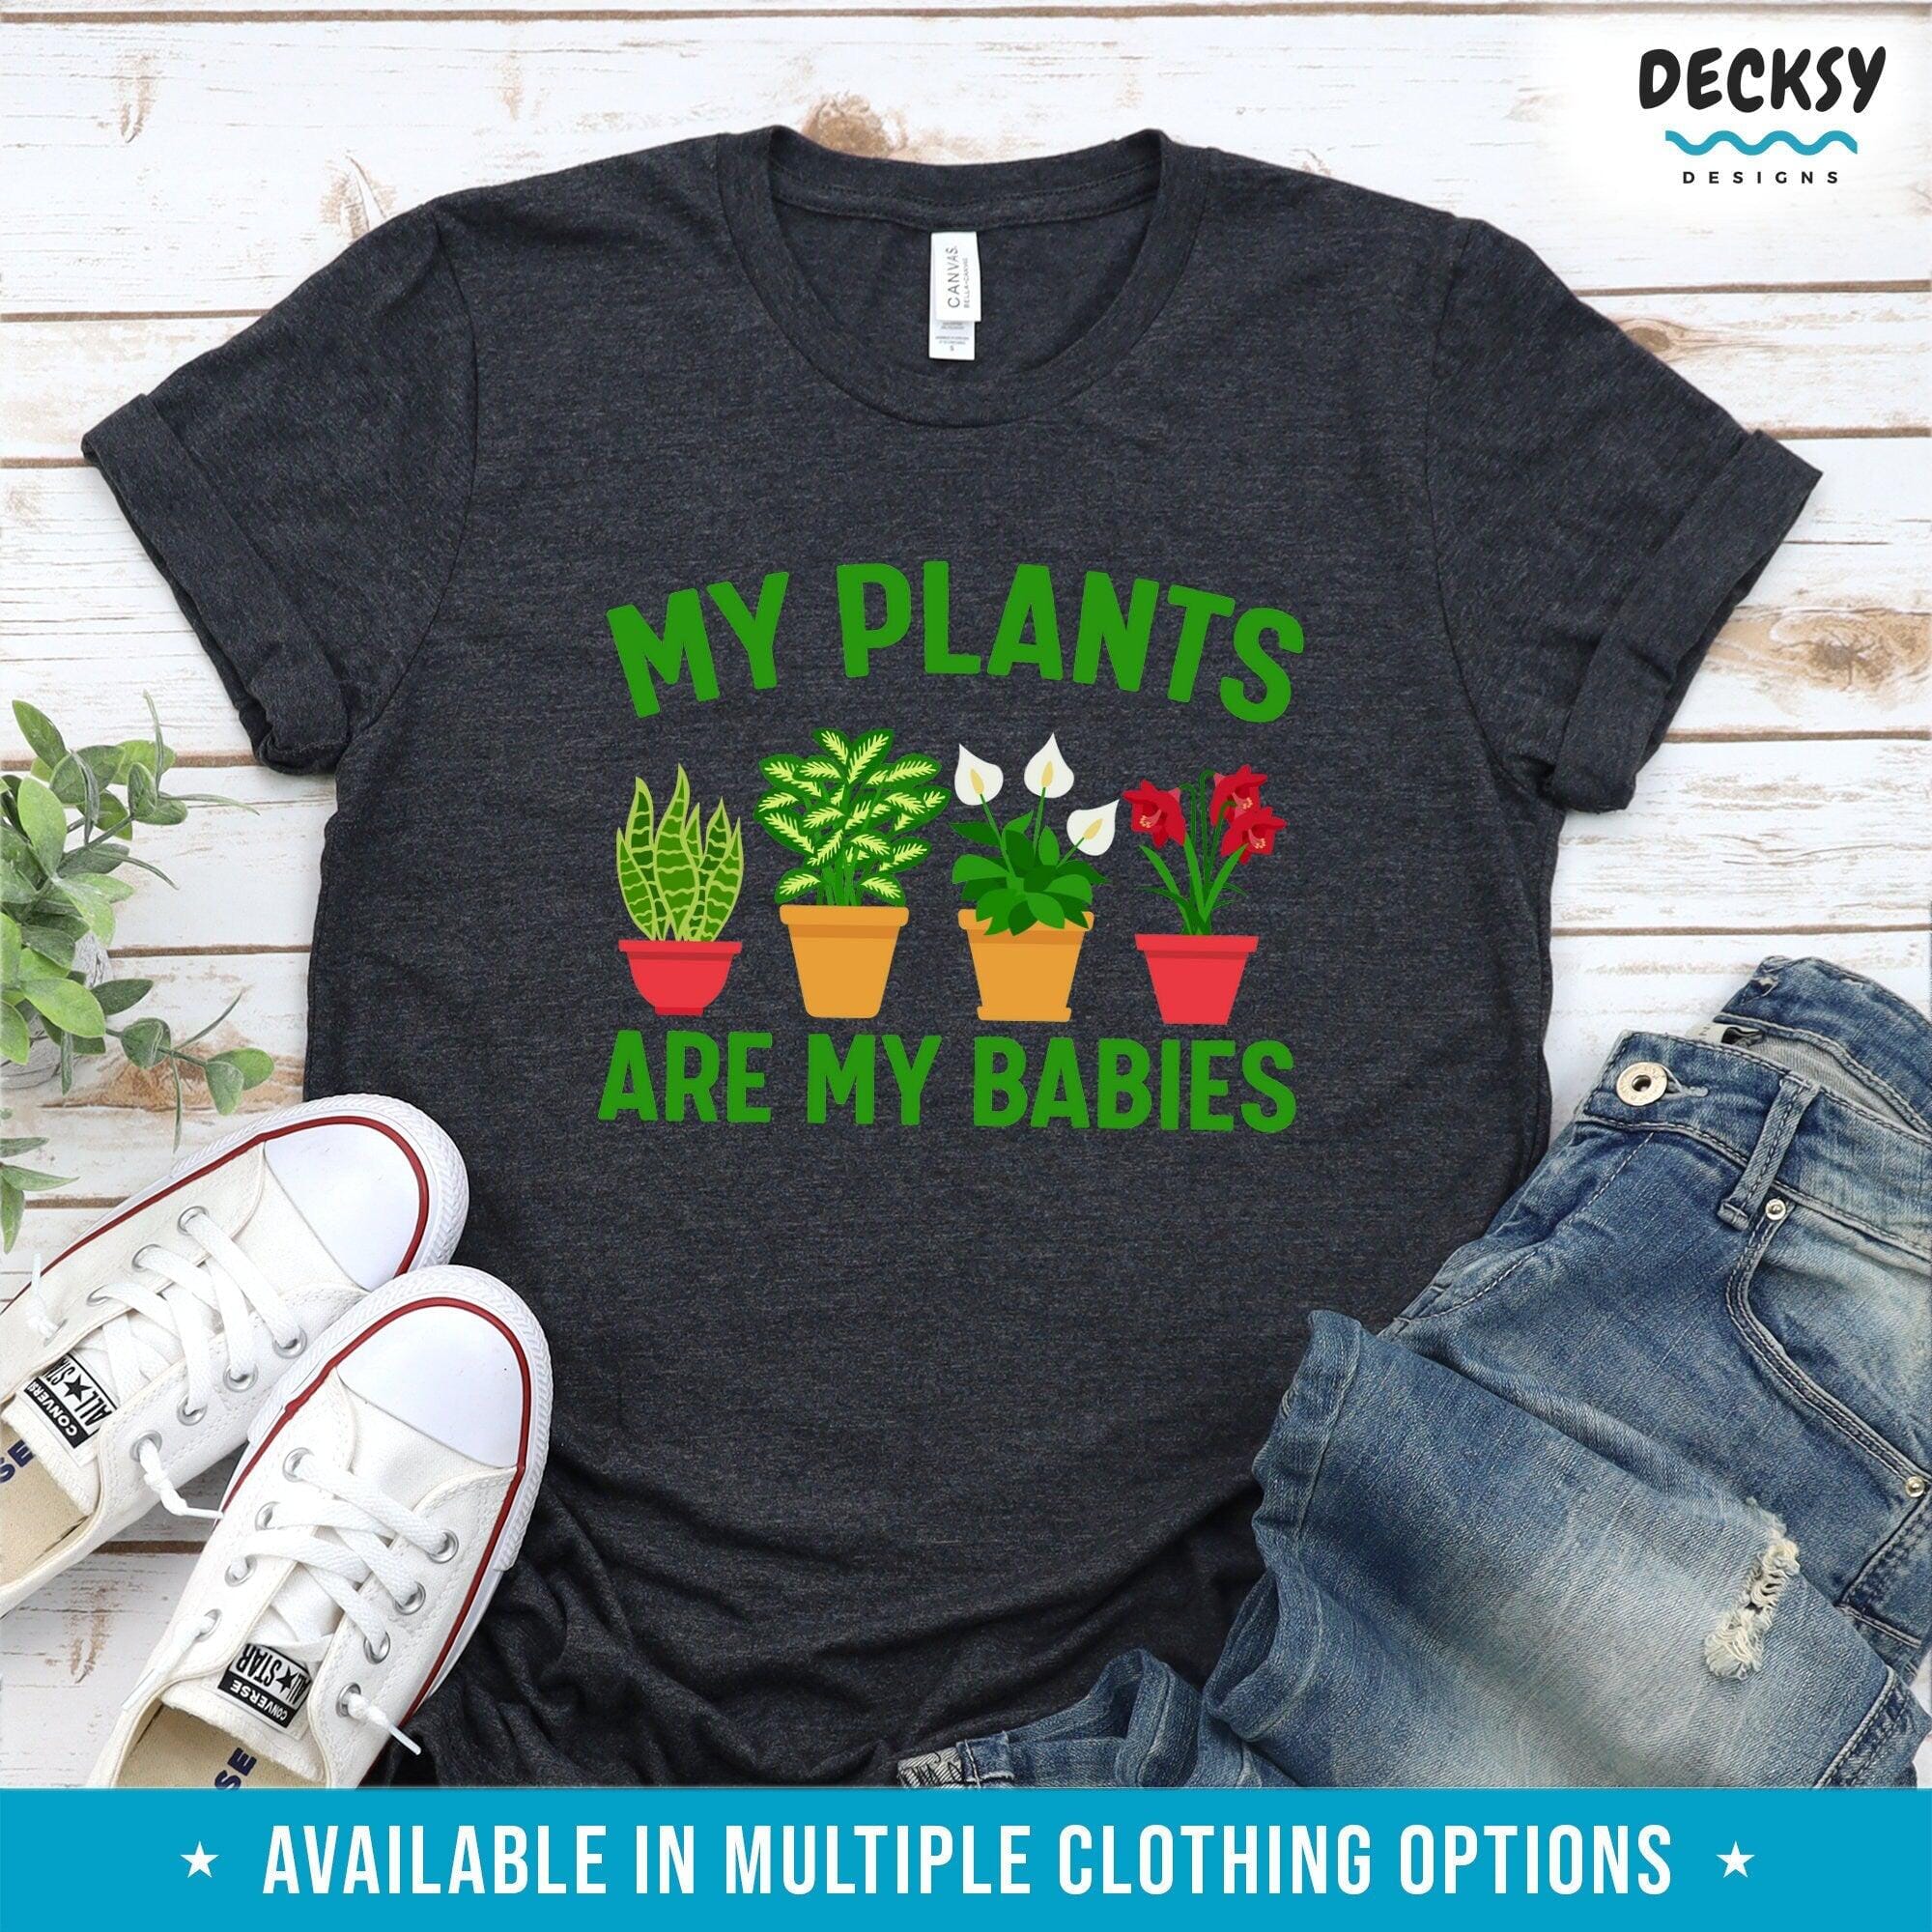 Gardening Shirt Gift For Gardener-Clothing:Gender-Neutral Adult Clothing:Tops & Tees:T-shirts:Graphic Tees-DecksyDesigns